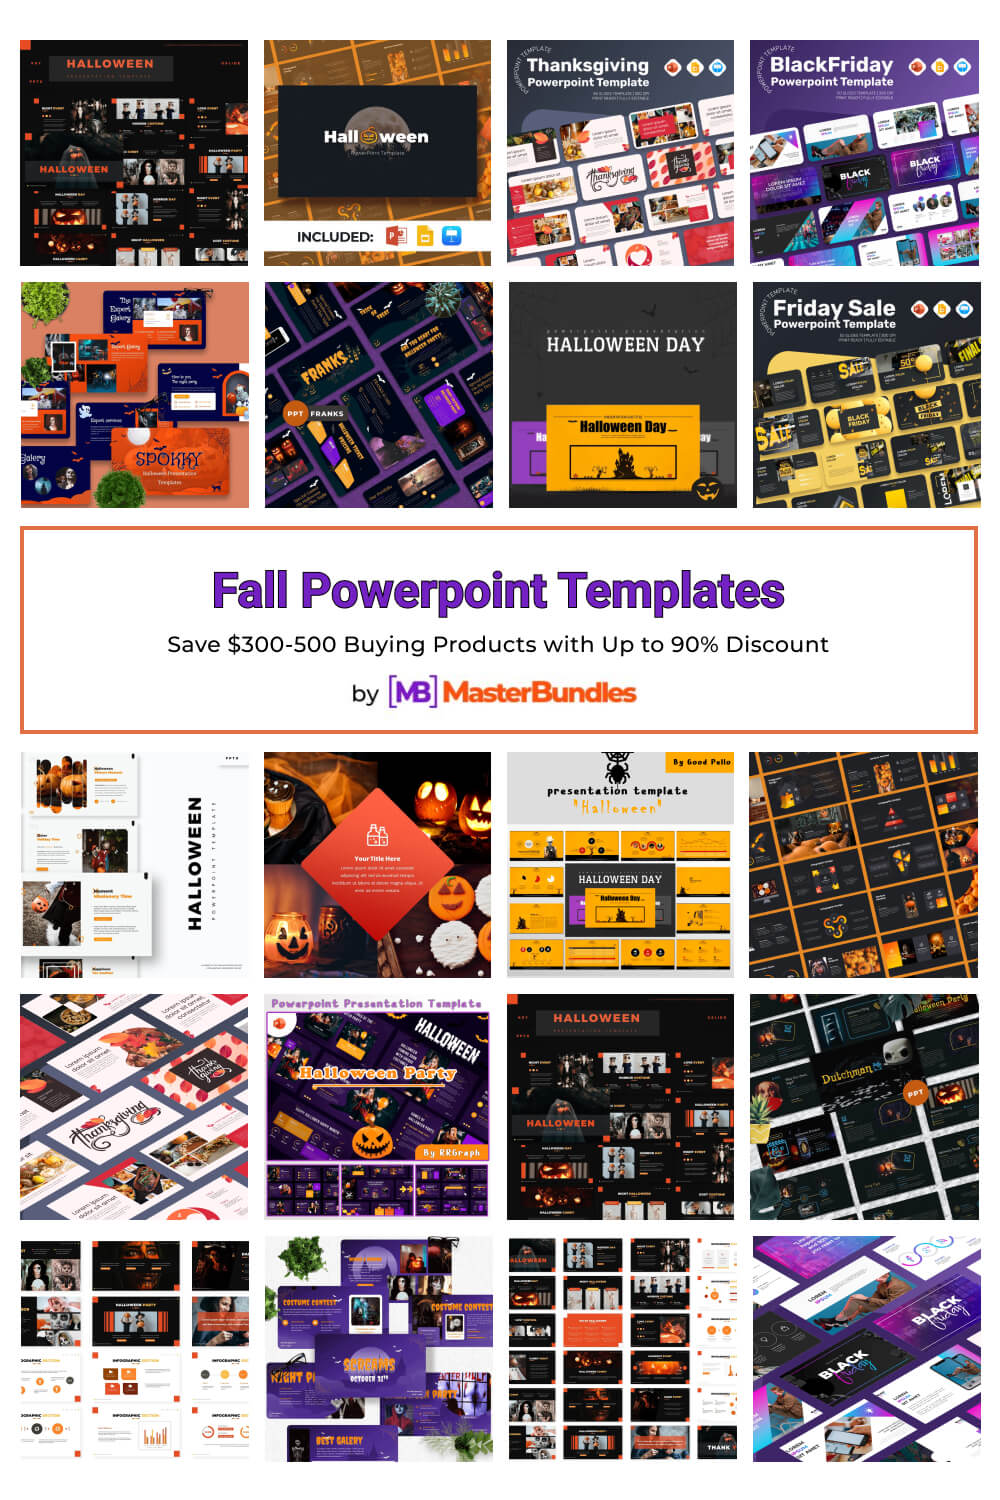 fall powerpoint templates pinterest image.